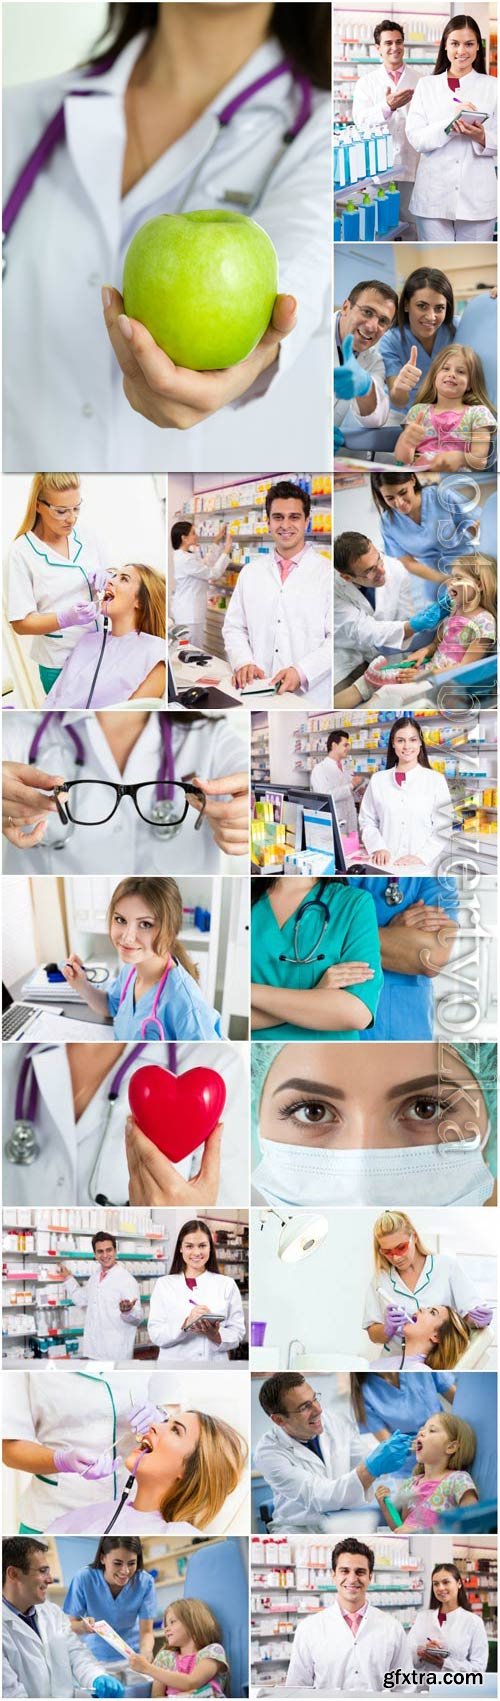 Set of photos with doctors stock photo